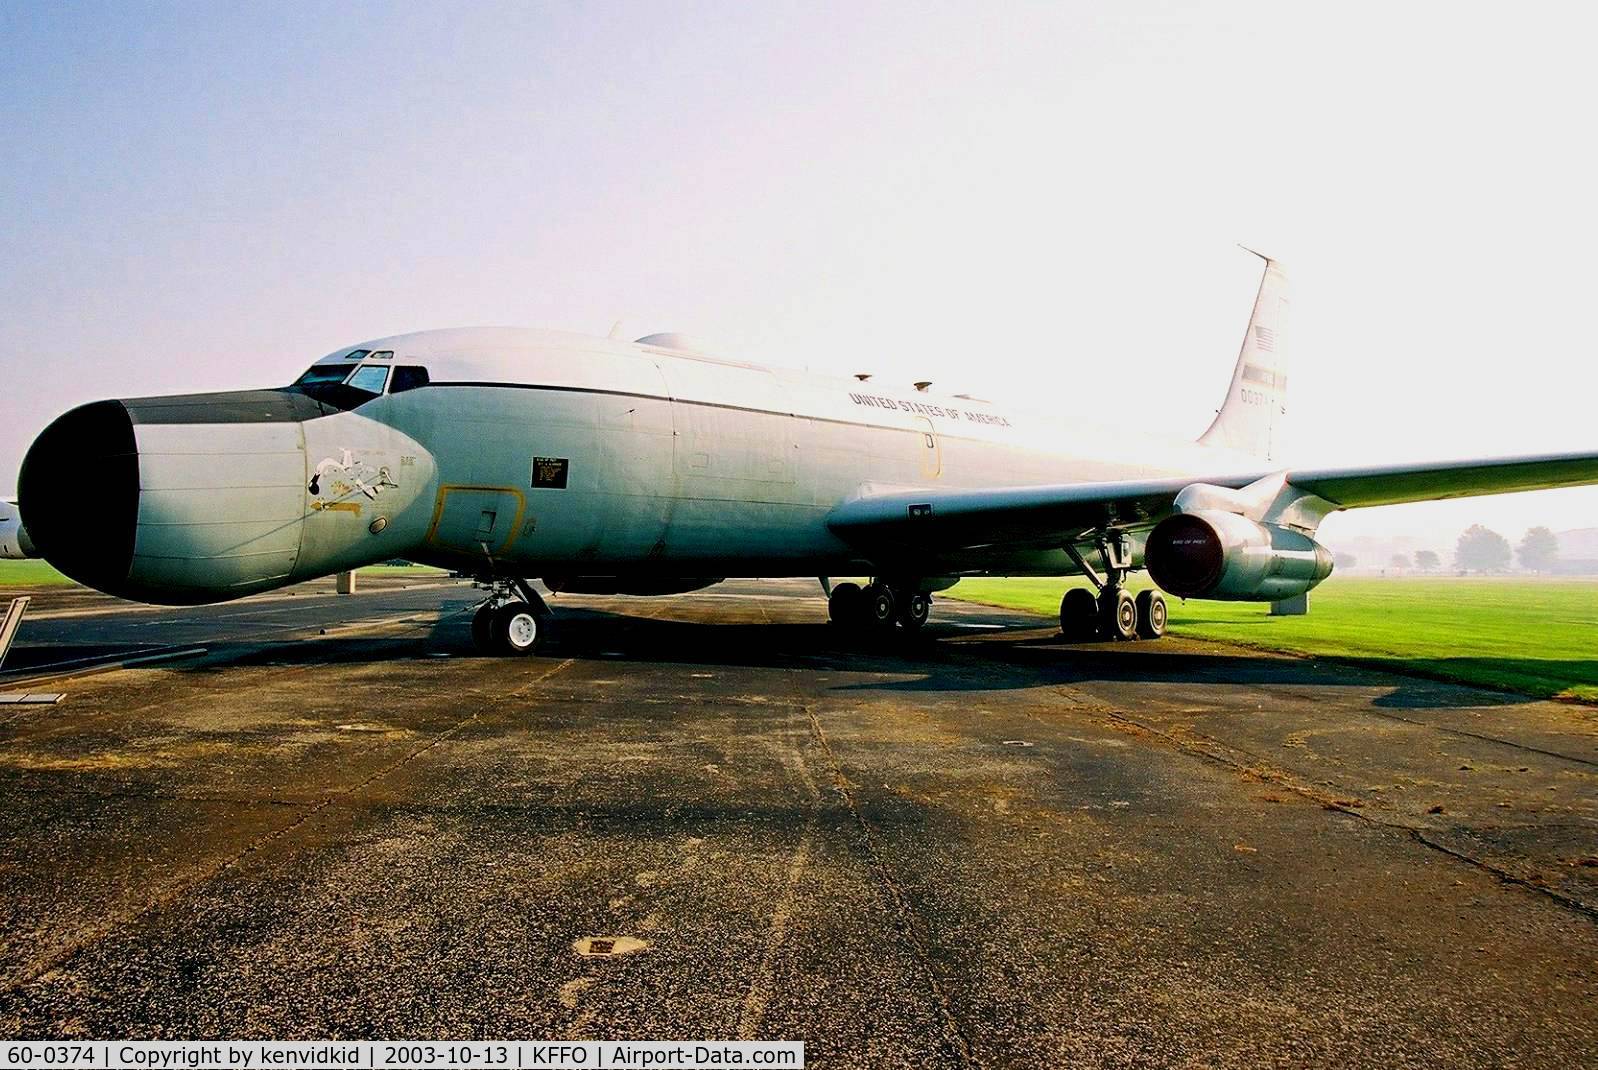 60-0374, 1960 Boeing EC-135N-BN Stratolifter C/N 18149, At The Museum of the United States Air Force Dayton Ohio.